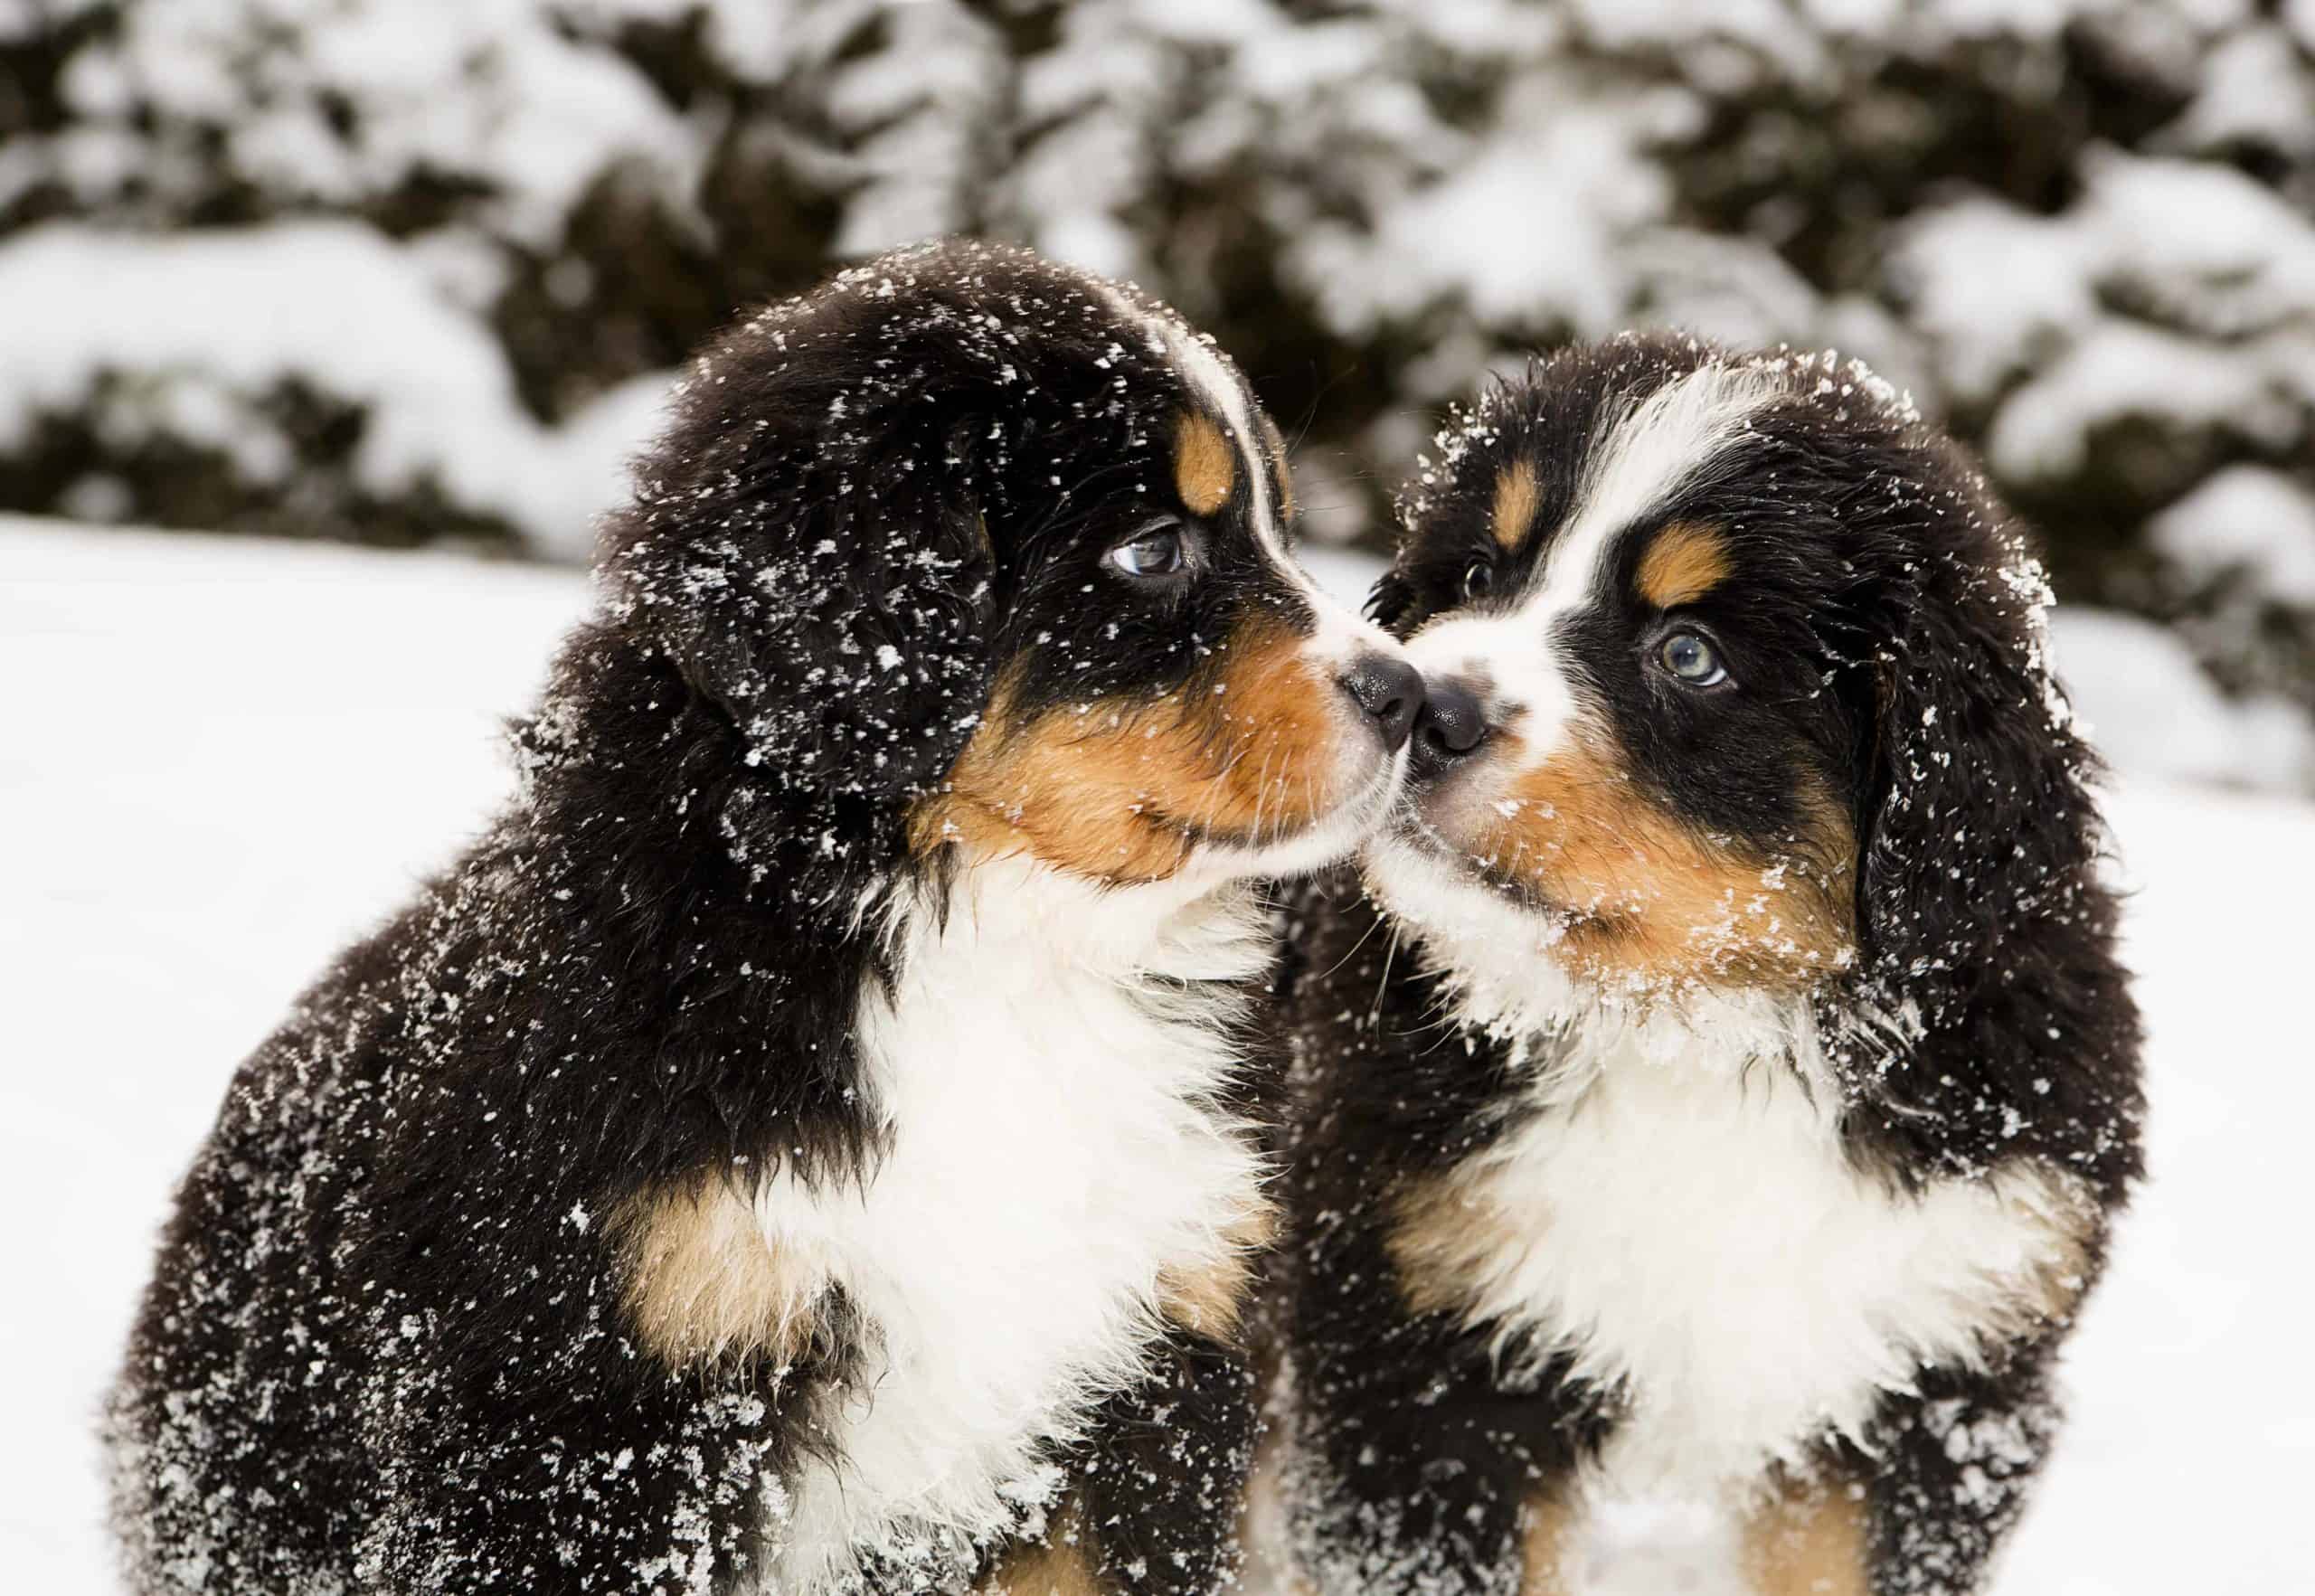 Pair of Bernese Mountain dogs kiss in the snow. In cooler, damper weather, barometric pressure drops, which can cause joint inflammation. If your pet is moving slowly or is sluggish when getting up from a nap, this could be due to inflammation.